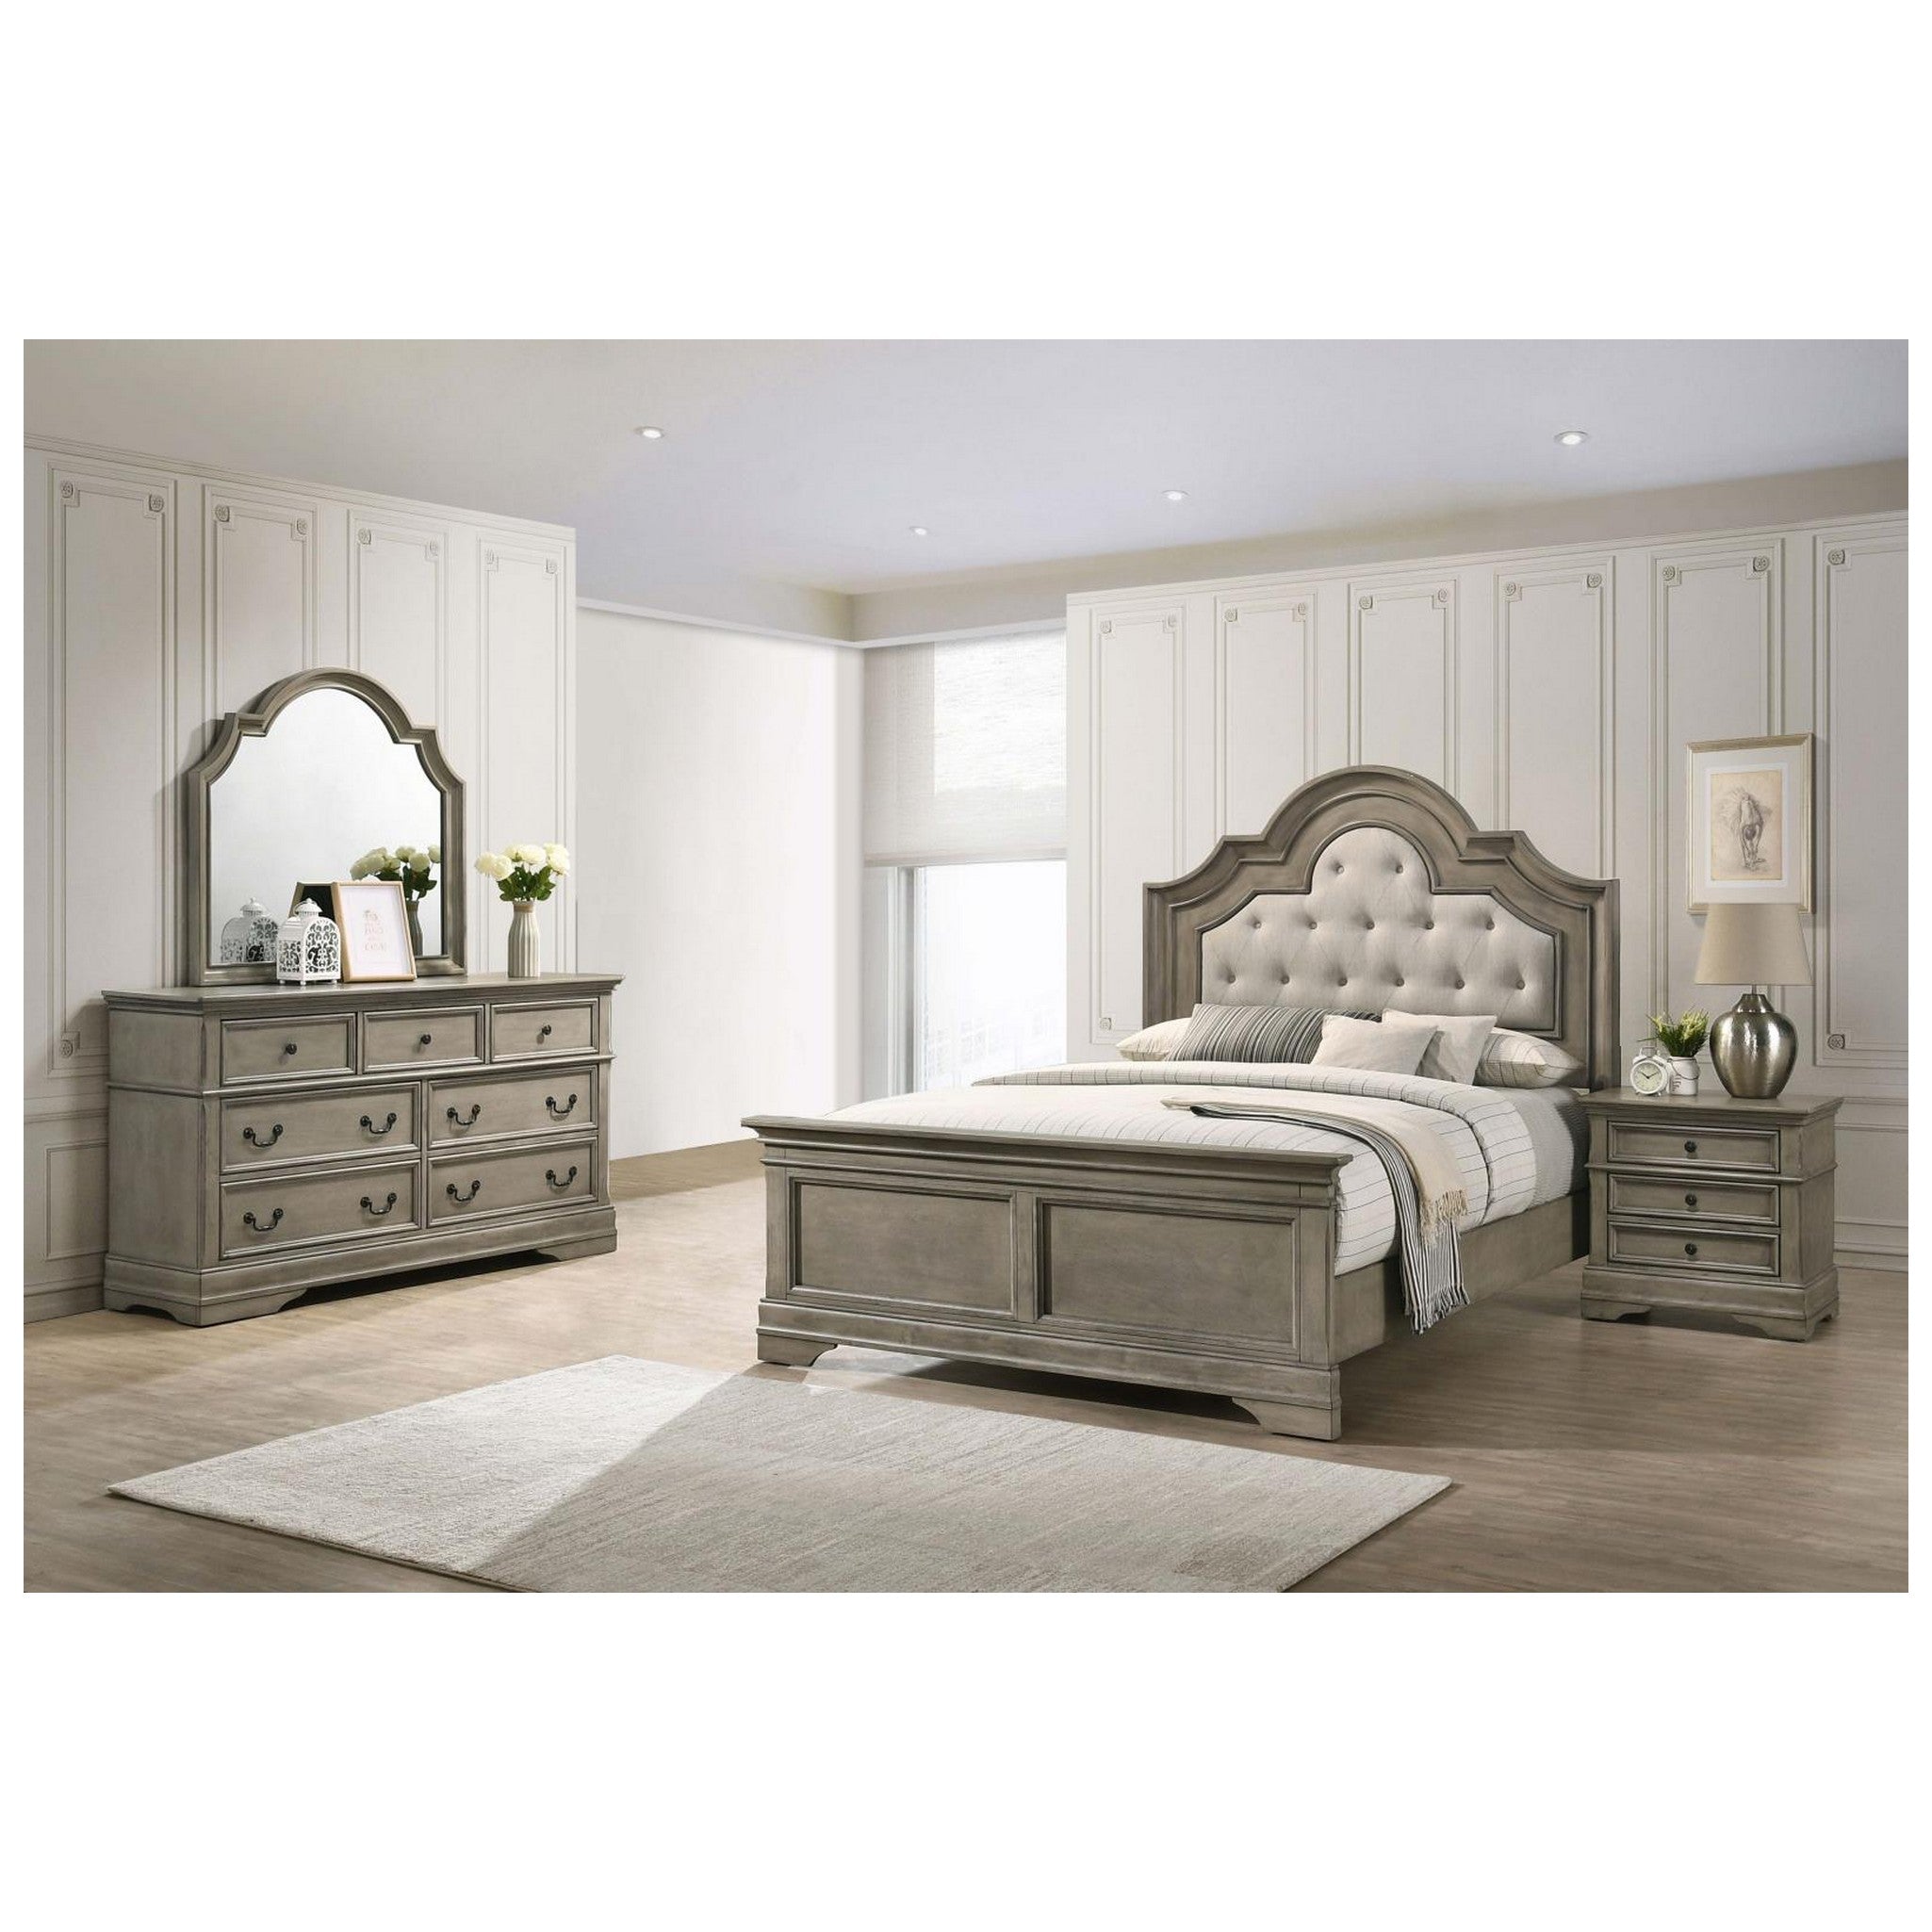 Manchester Bedroom Set with Upholstered Arched Headboard Wheat 222891KE-S4